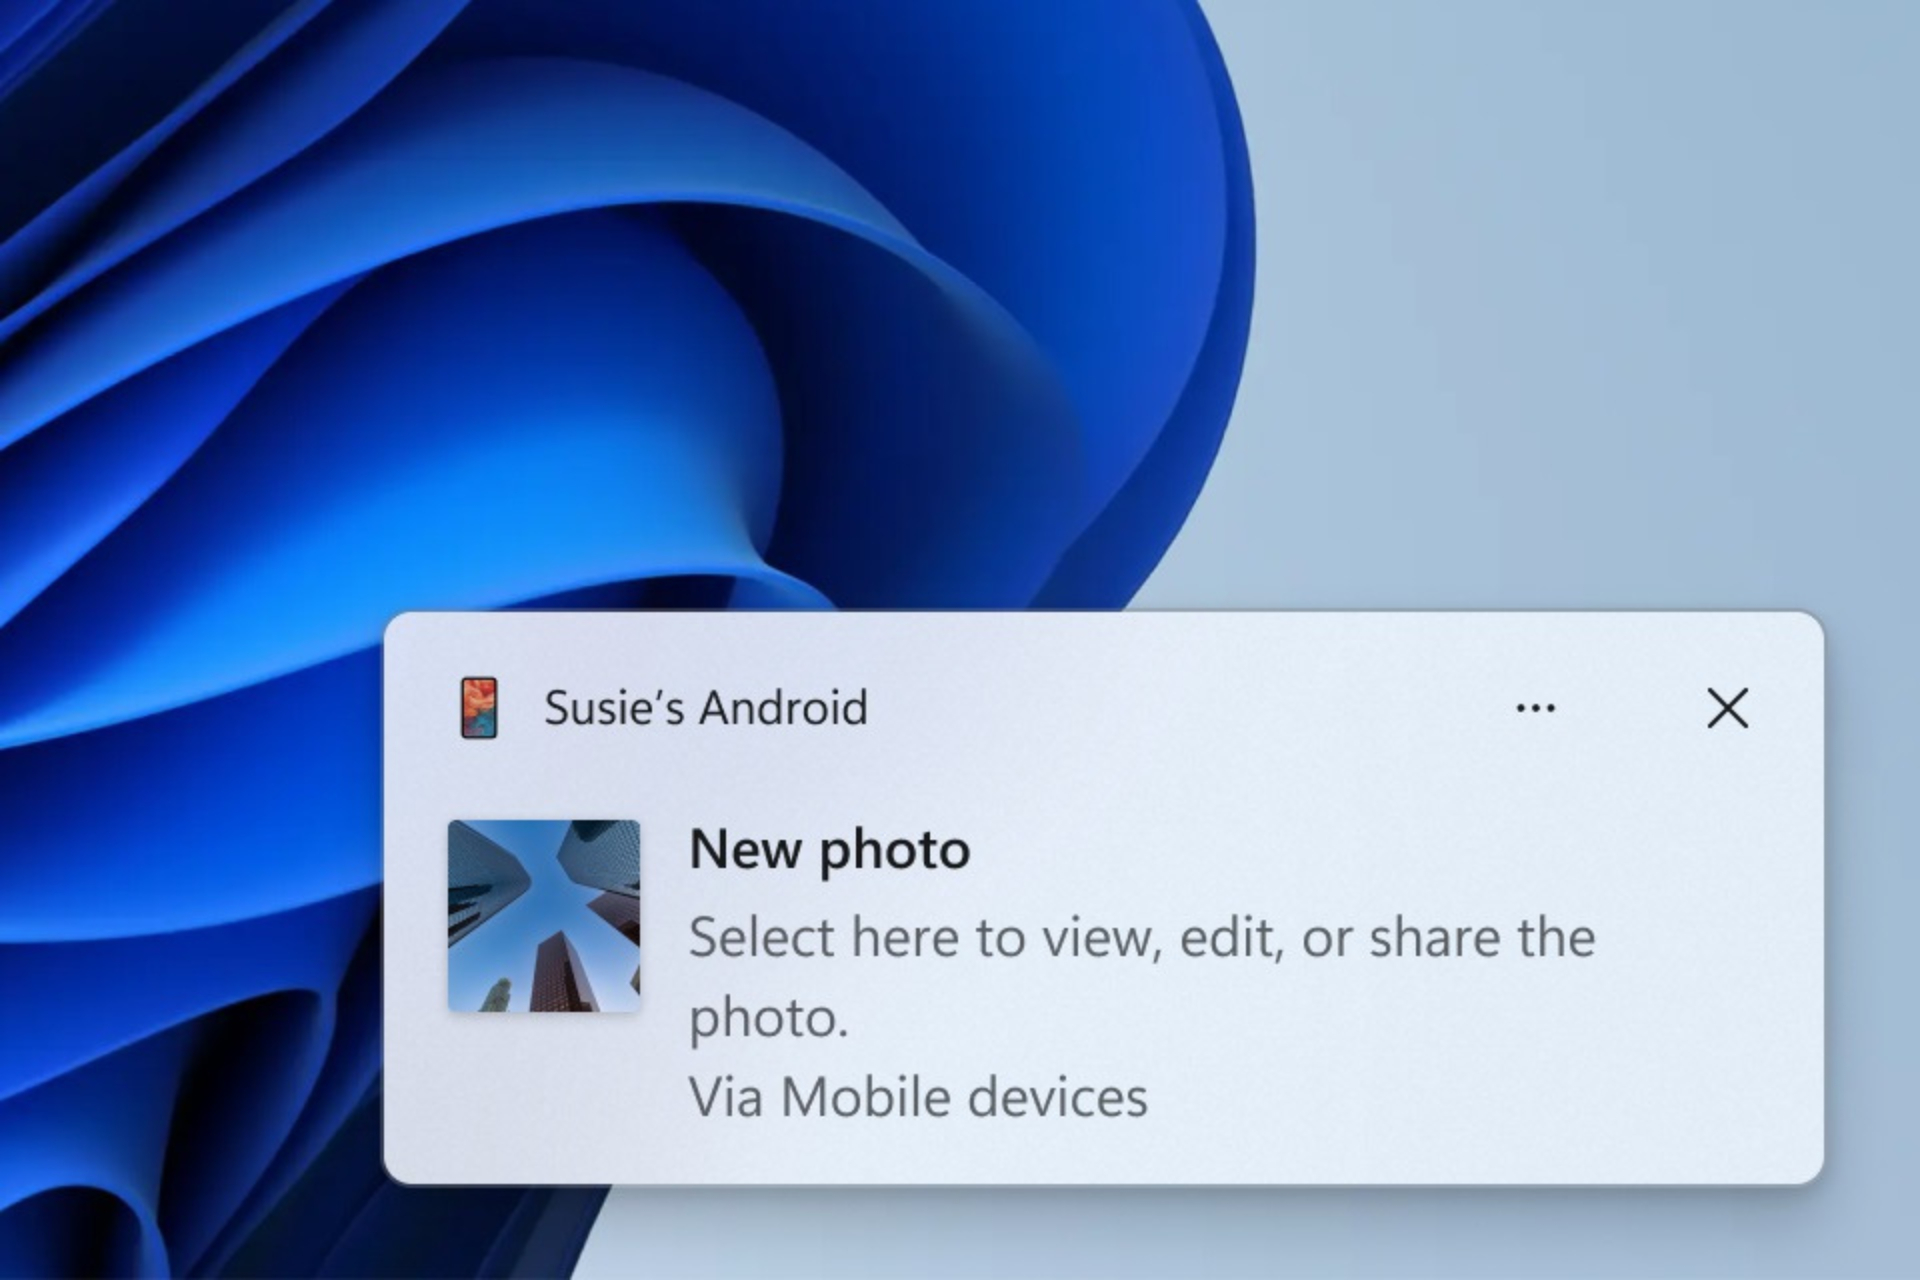 Now you can get instant image notifications from android mobile